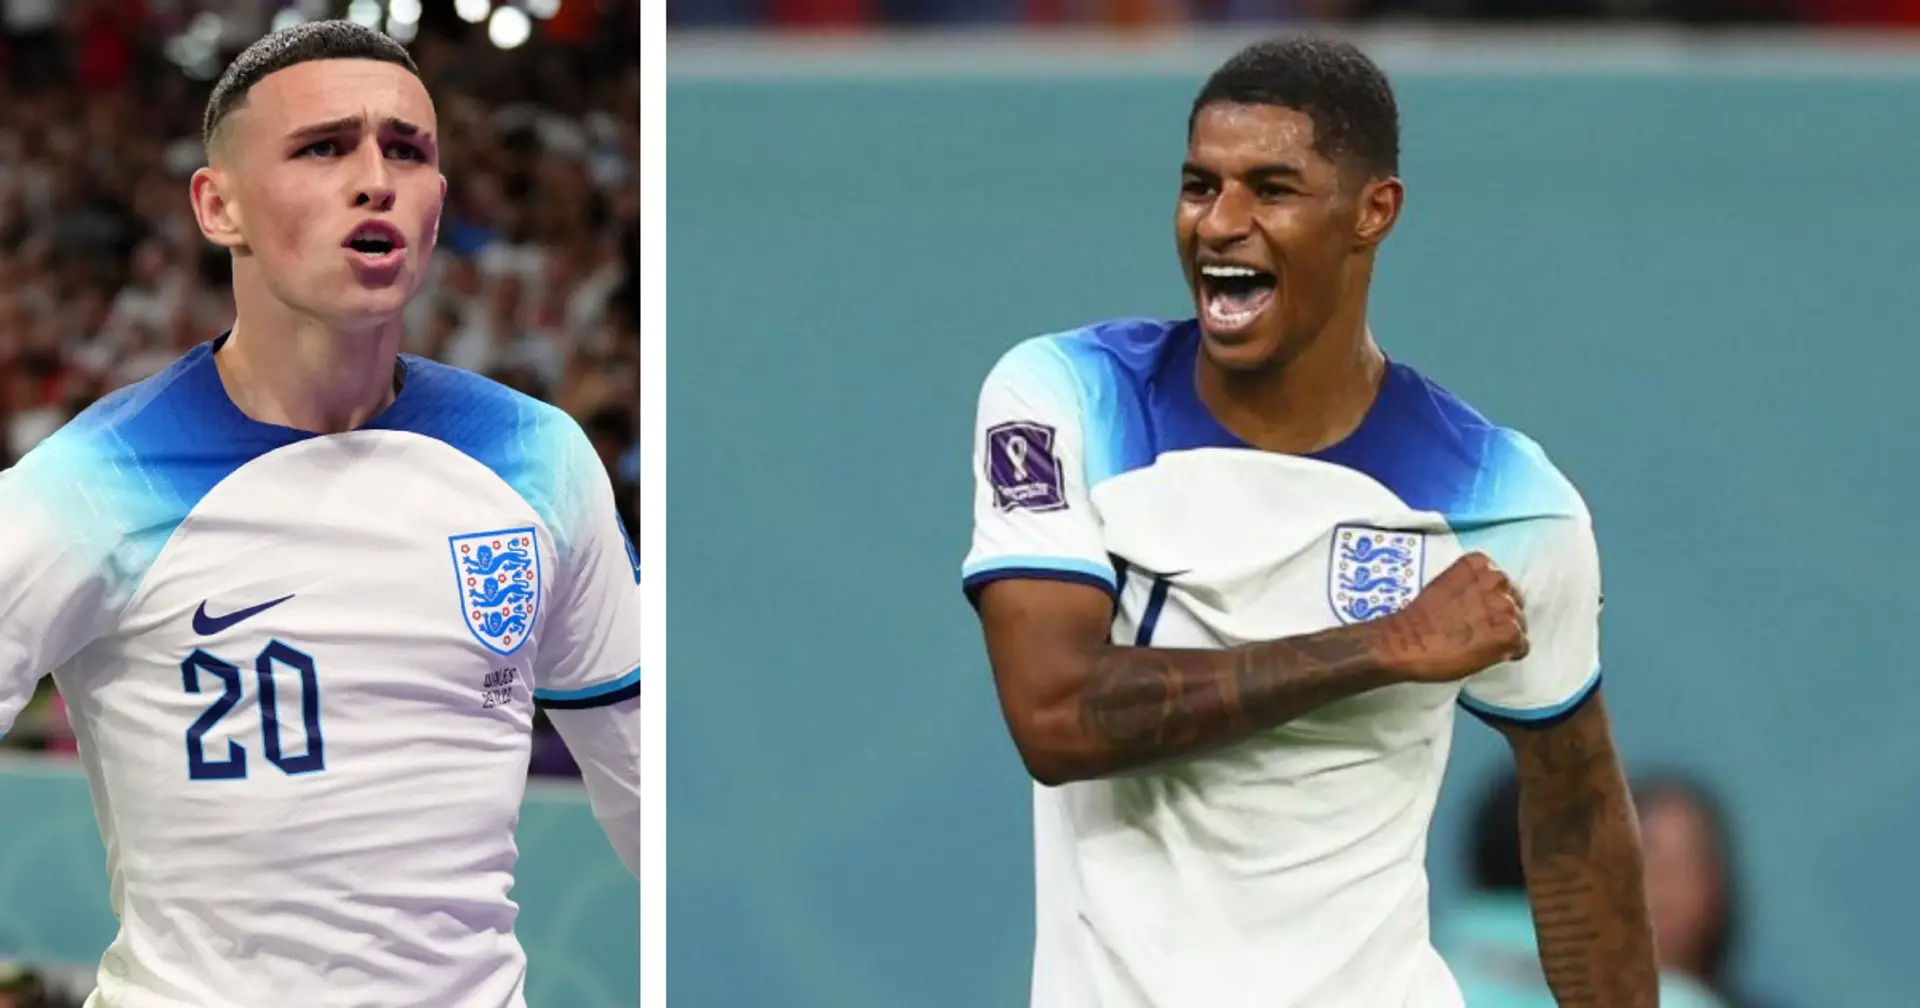 'This guy is top 3 in the world': Man City's Phil Foden blown away by Marcus Rashford